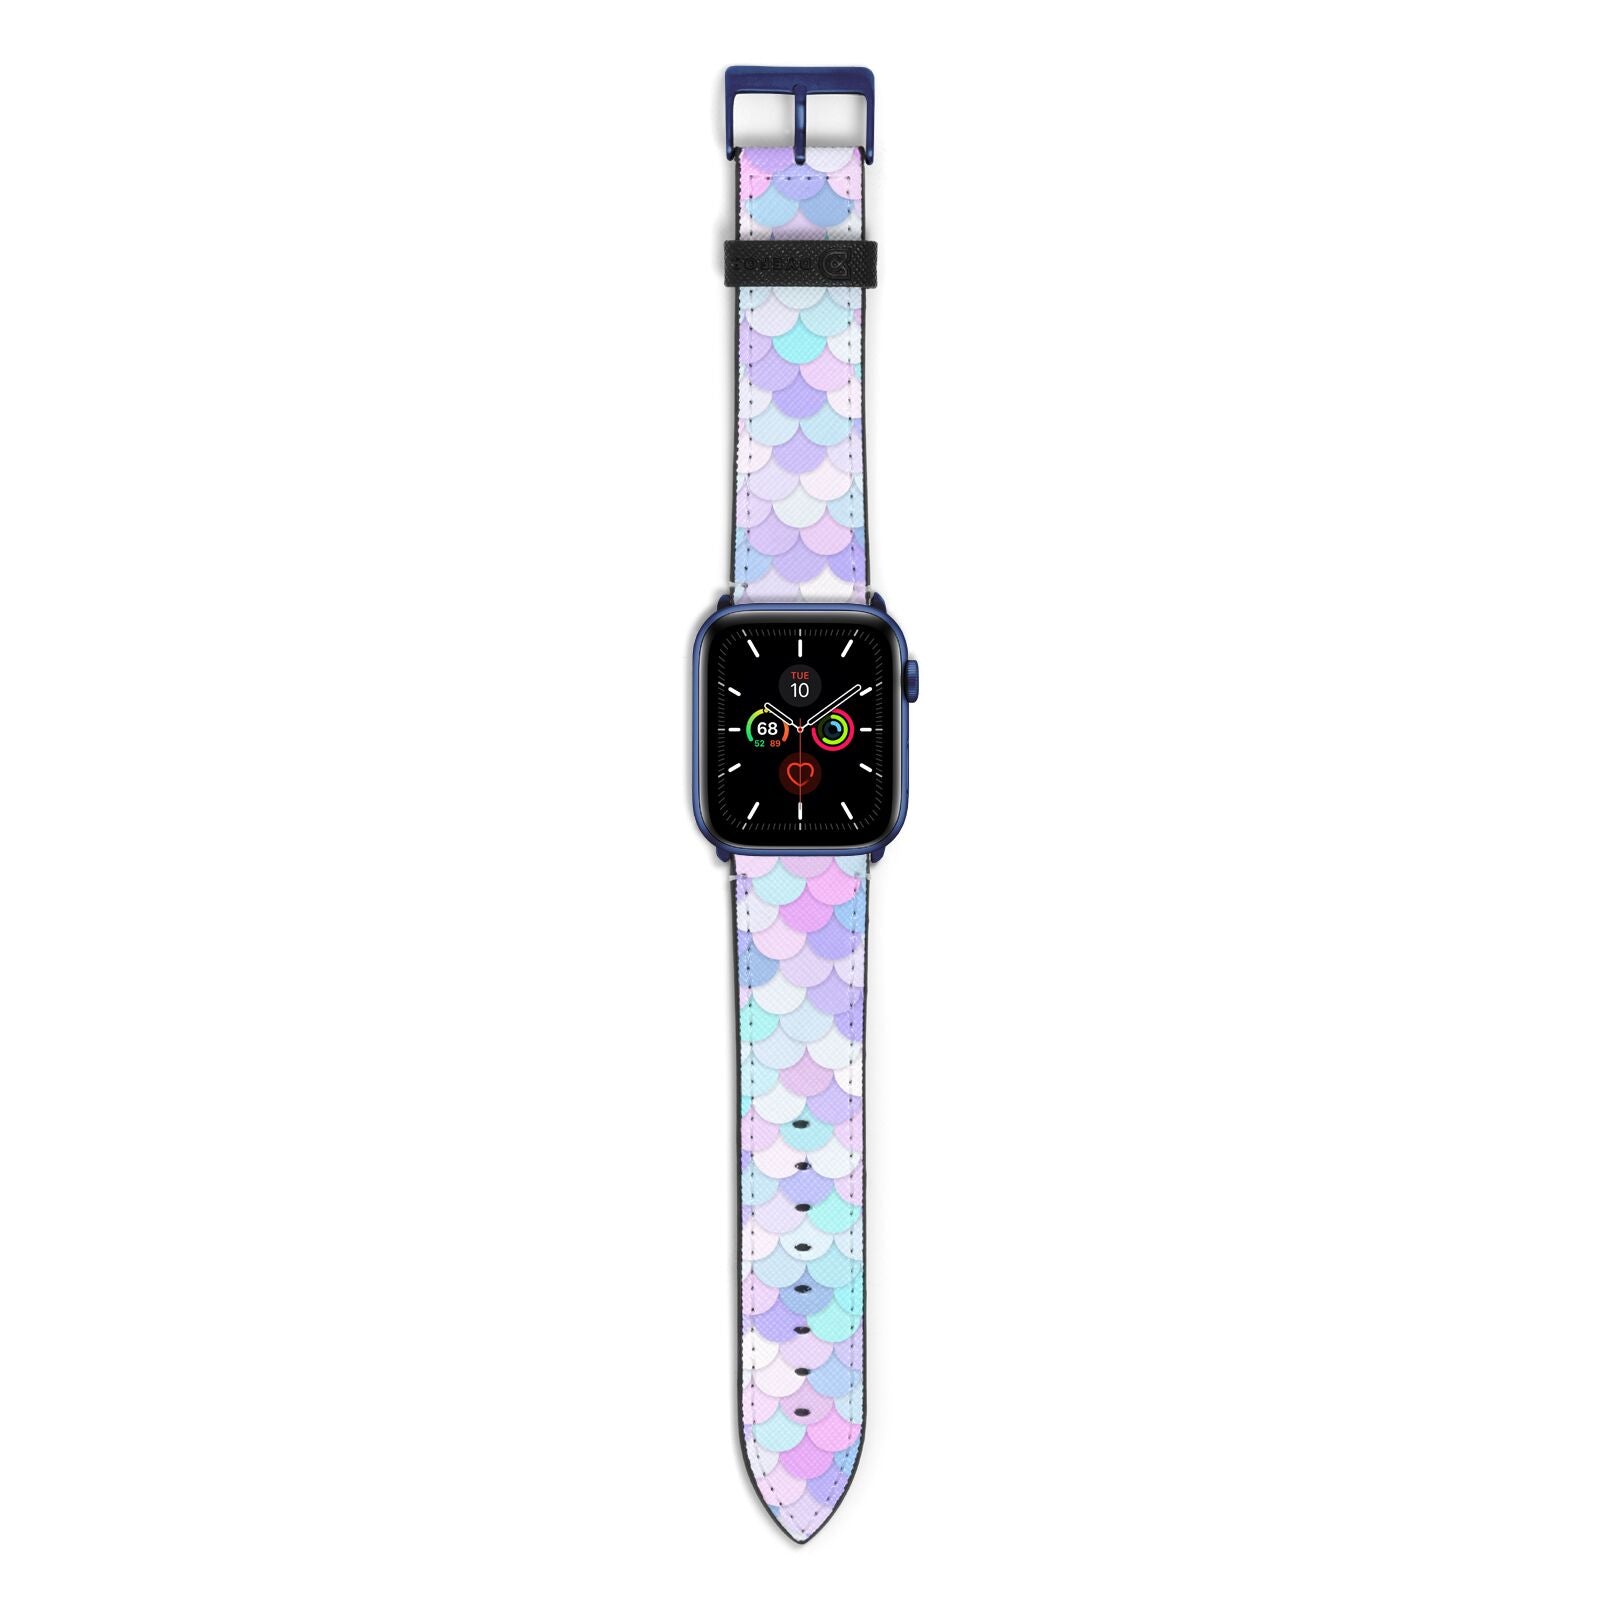 Mermaid Apple Watch Strap with Blue Hardware